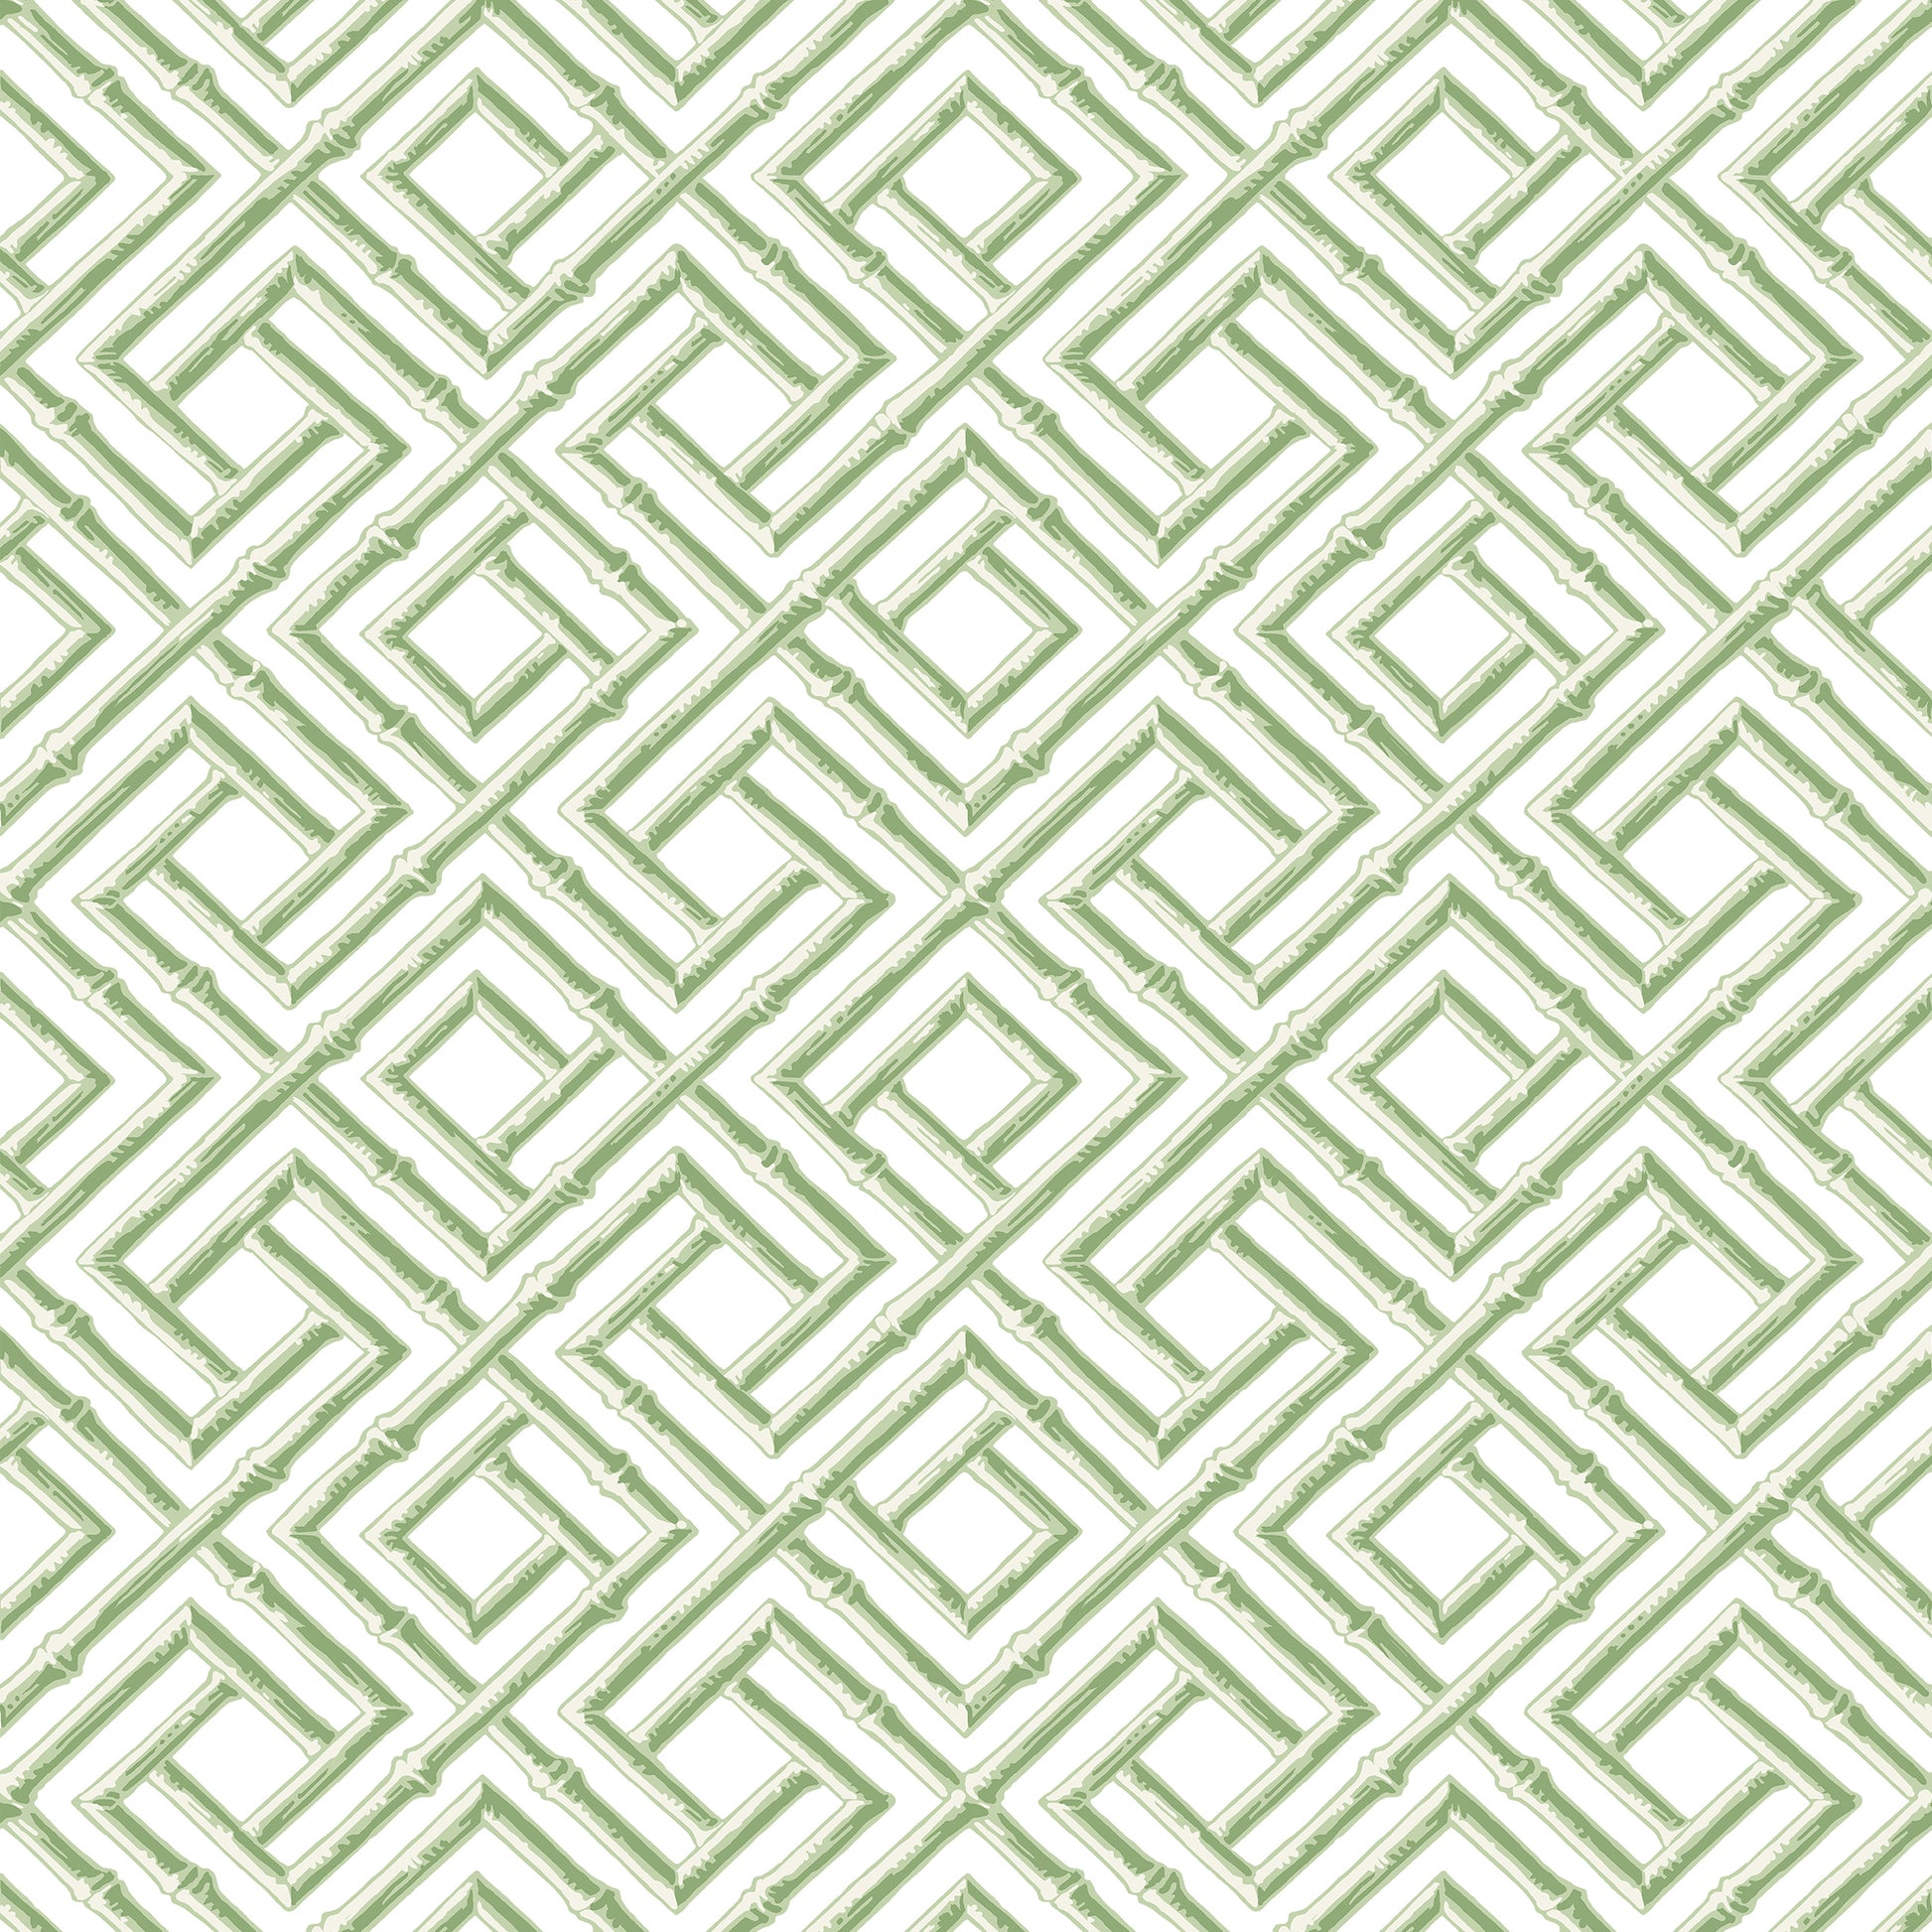 Purchase Thibaut Wallpaper Item# T42049 pattern name French Lattice color Green. 